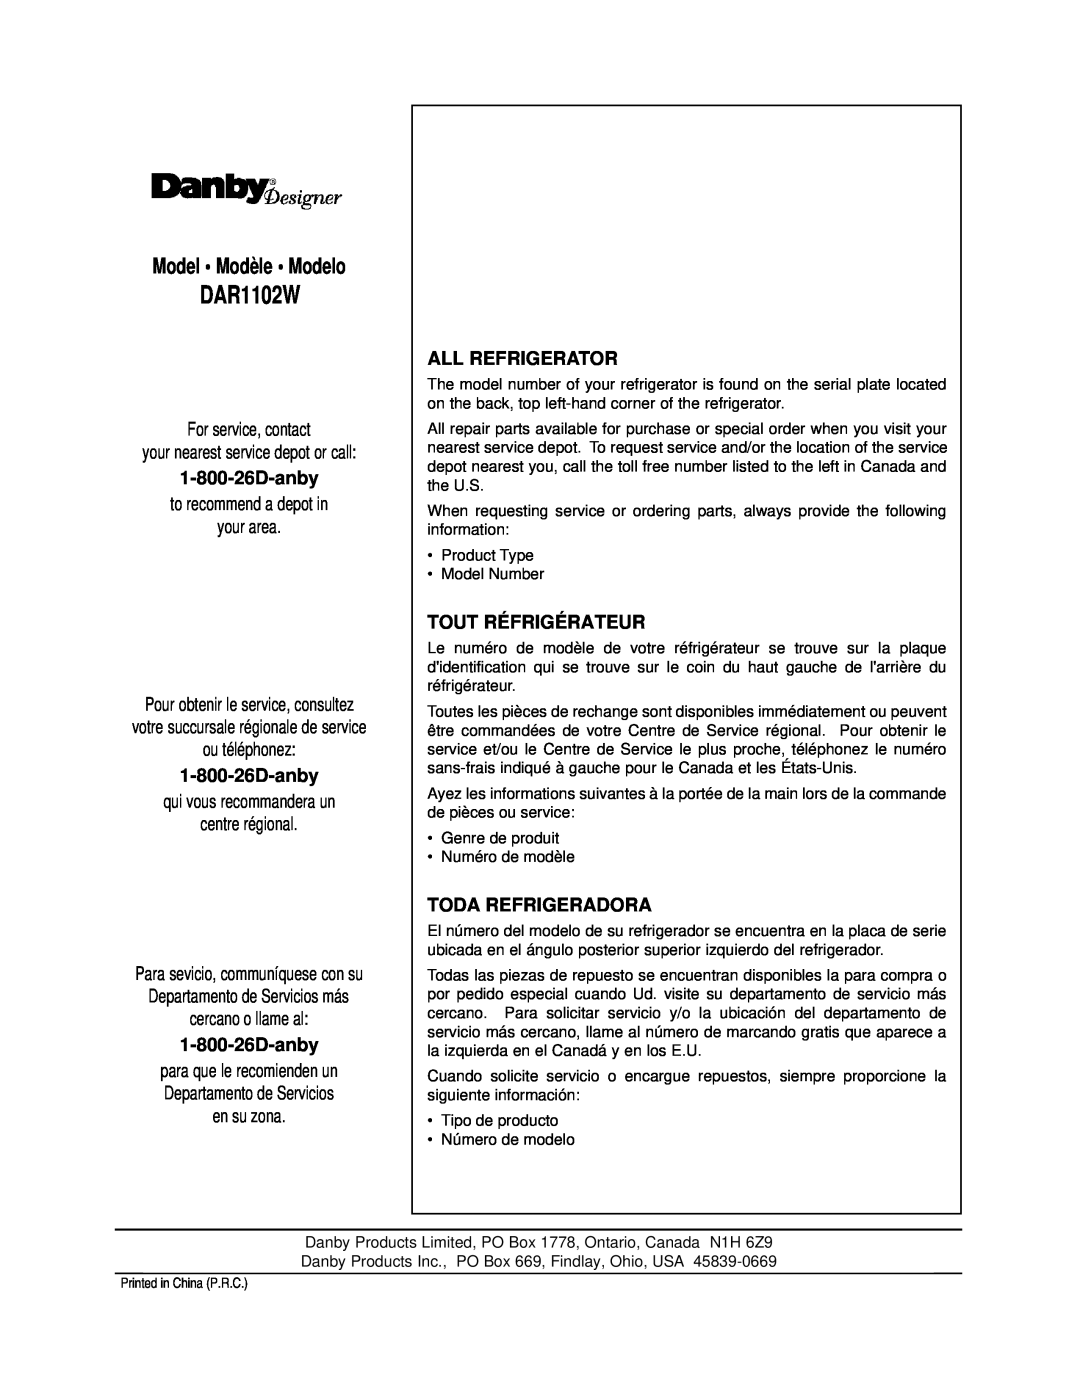 Danby DAR1102W manual Model Modèle Modelo, For service, contact, your nearest service depot or call, All Refrigerator 